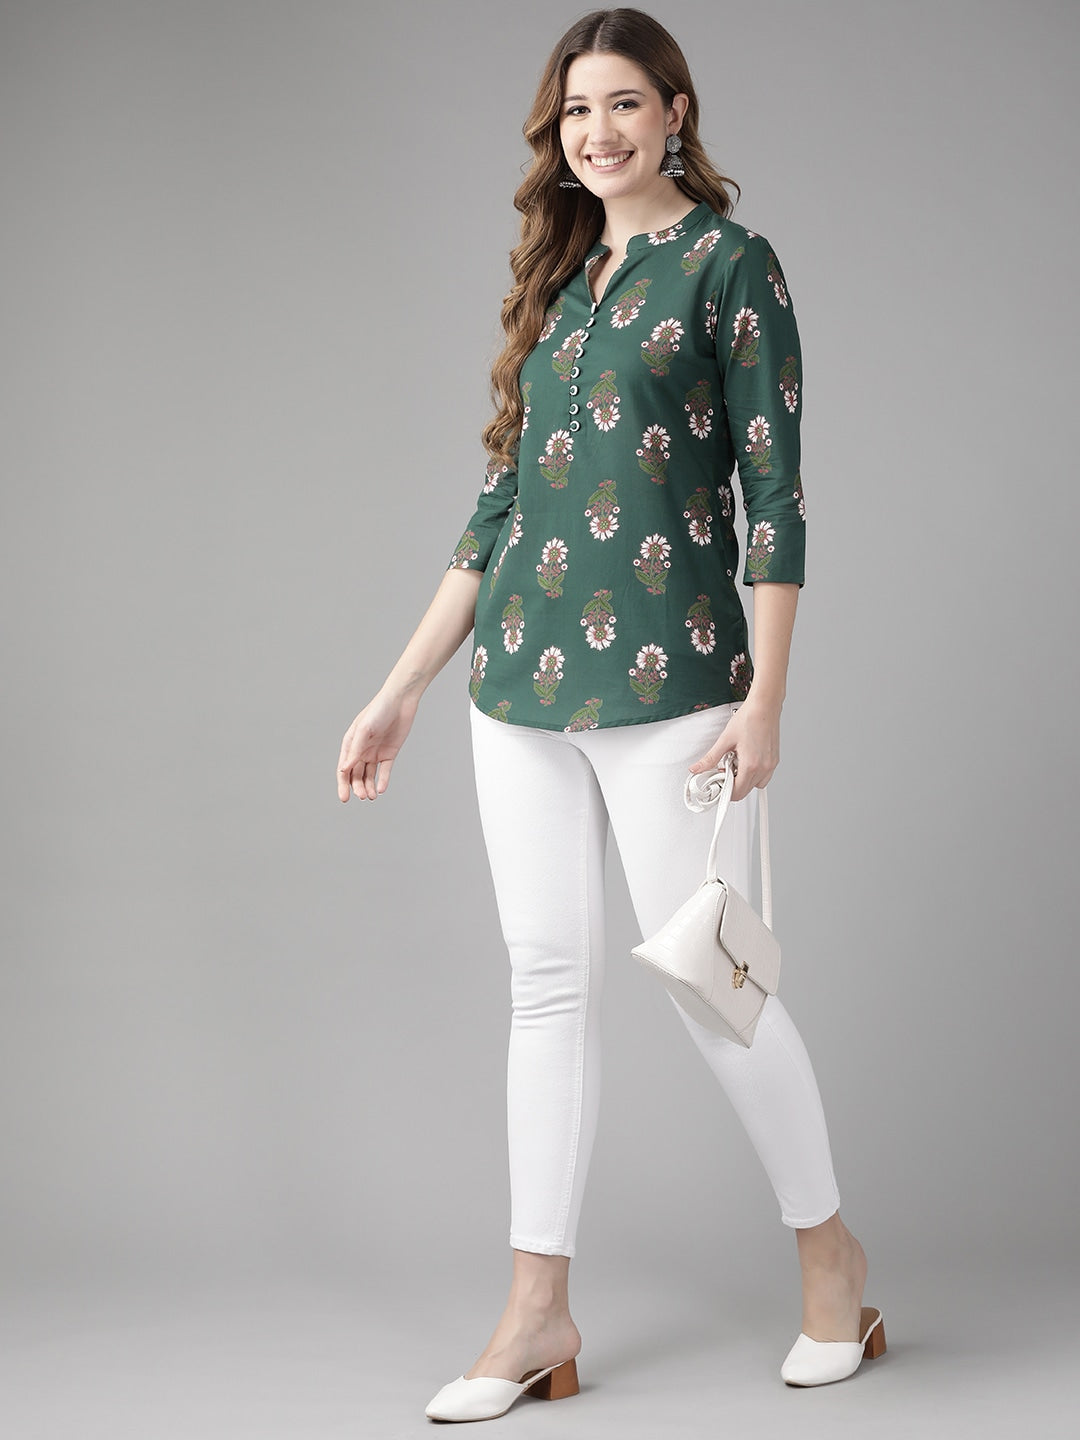 Green Floral Printed Top-Yufta Store-9650TOPGRXS